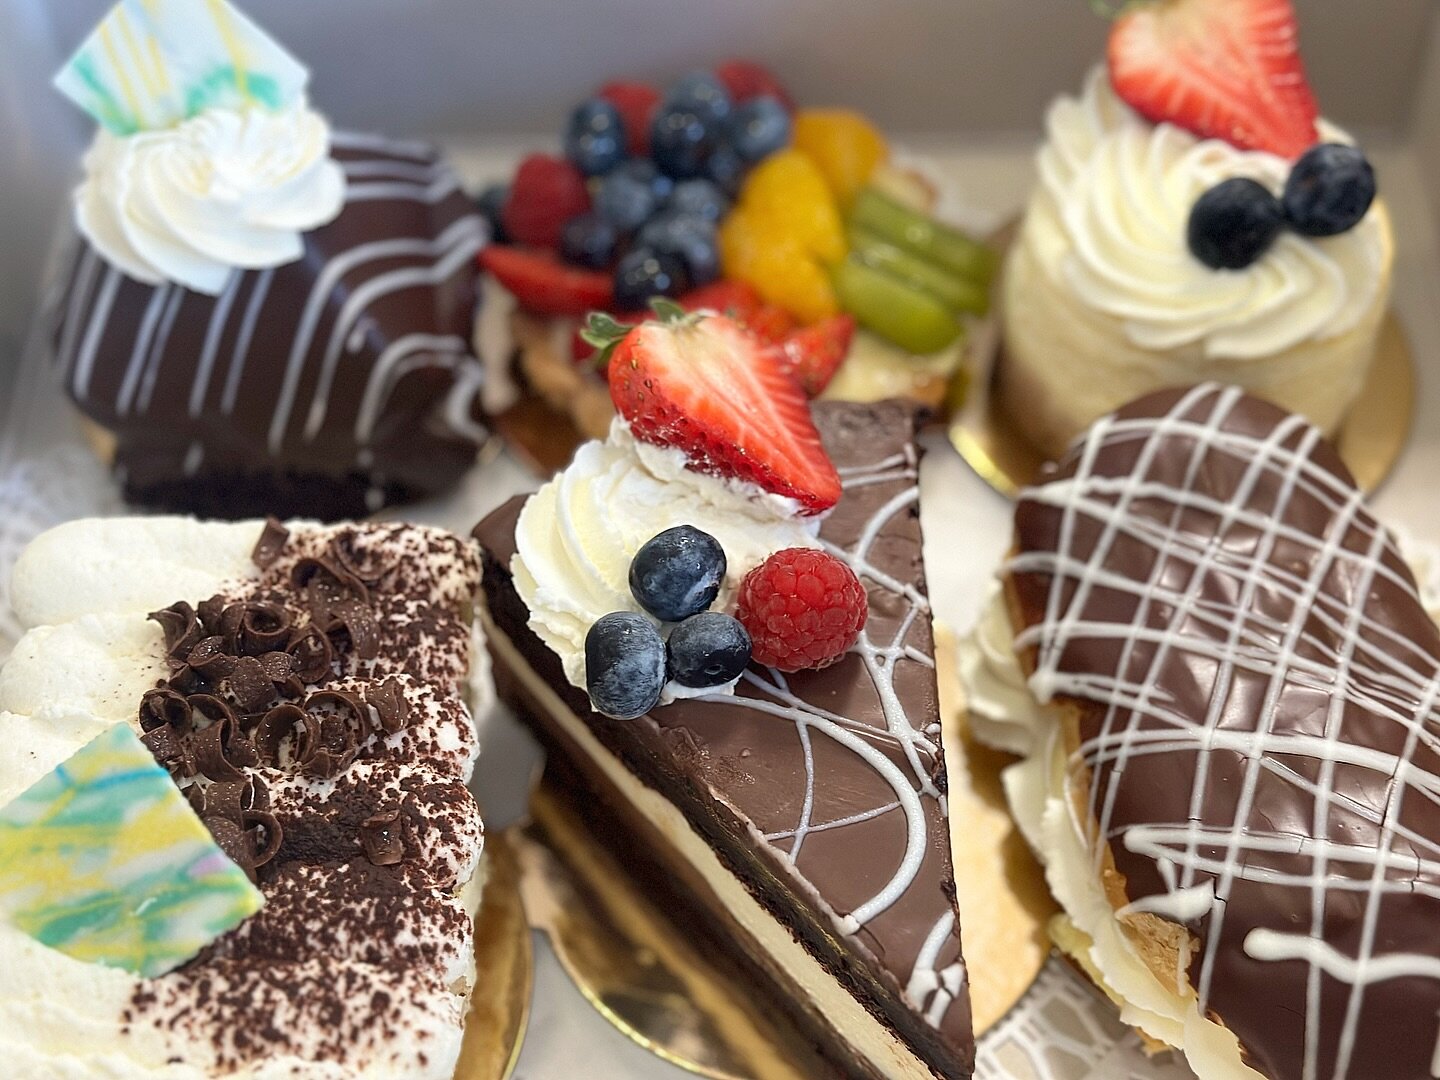 Good morning Heaven 😇 
Our baker Mayra makes these decadent desserts from scratch, daily - in house!  Her desserts are to die for! 

Chocolate Pyramid - chocolate cake, chocolate mousse, dipped in chocolate ganache on a chocolate cake base!

Fruit T